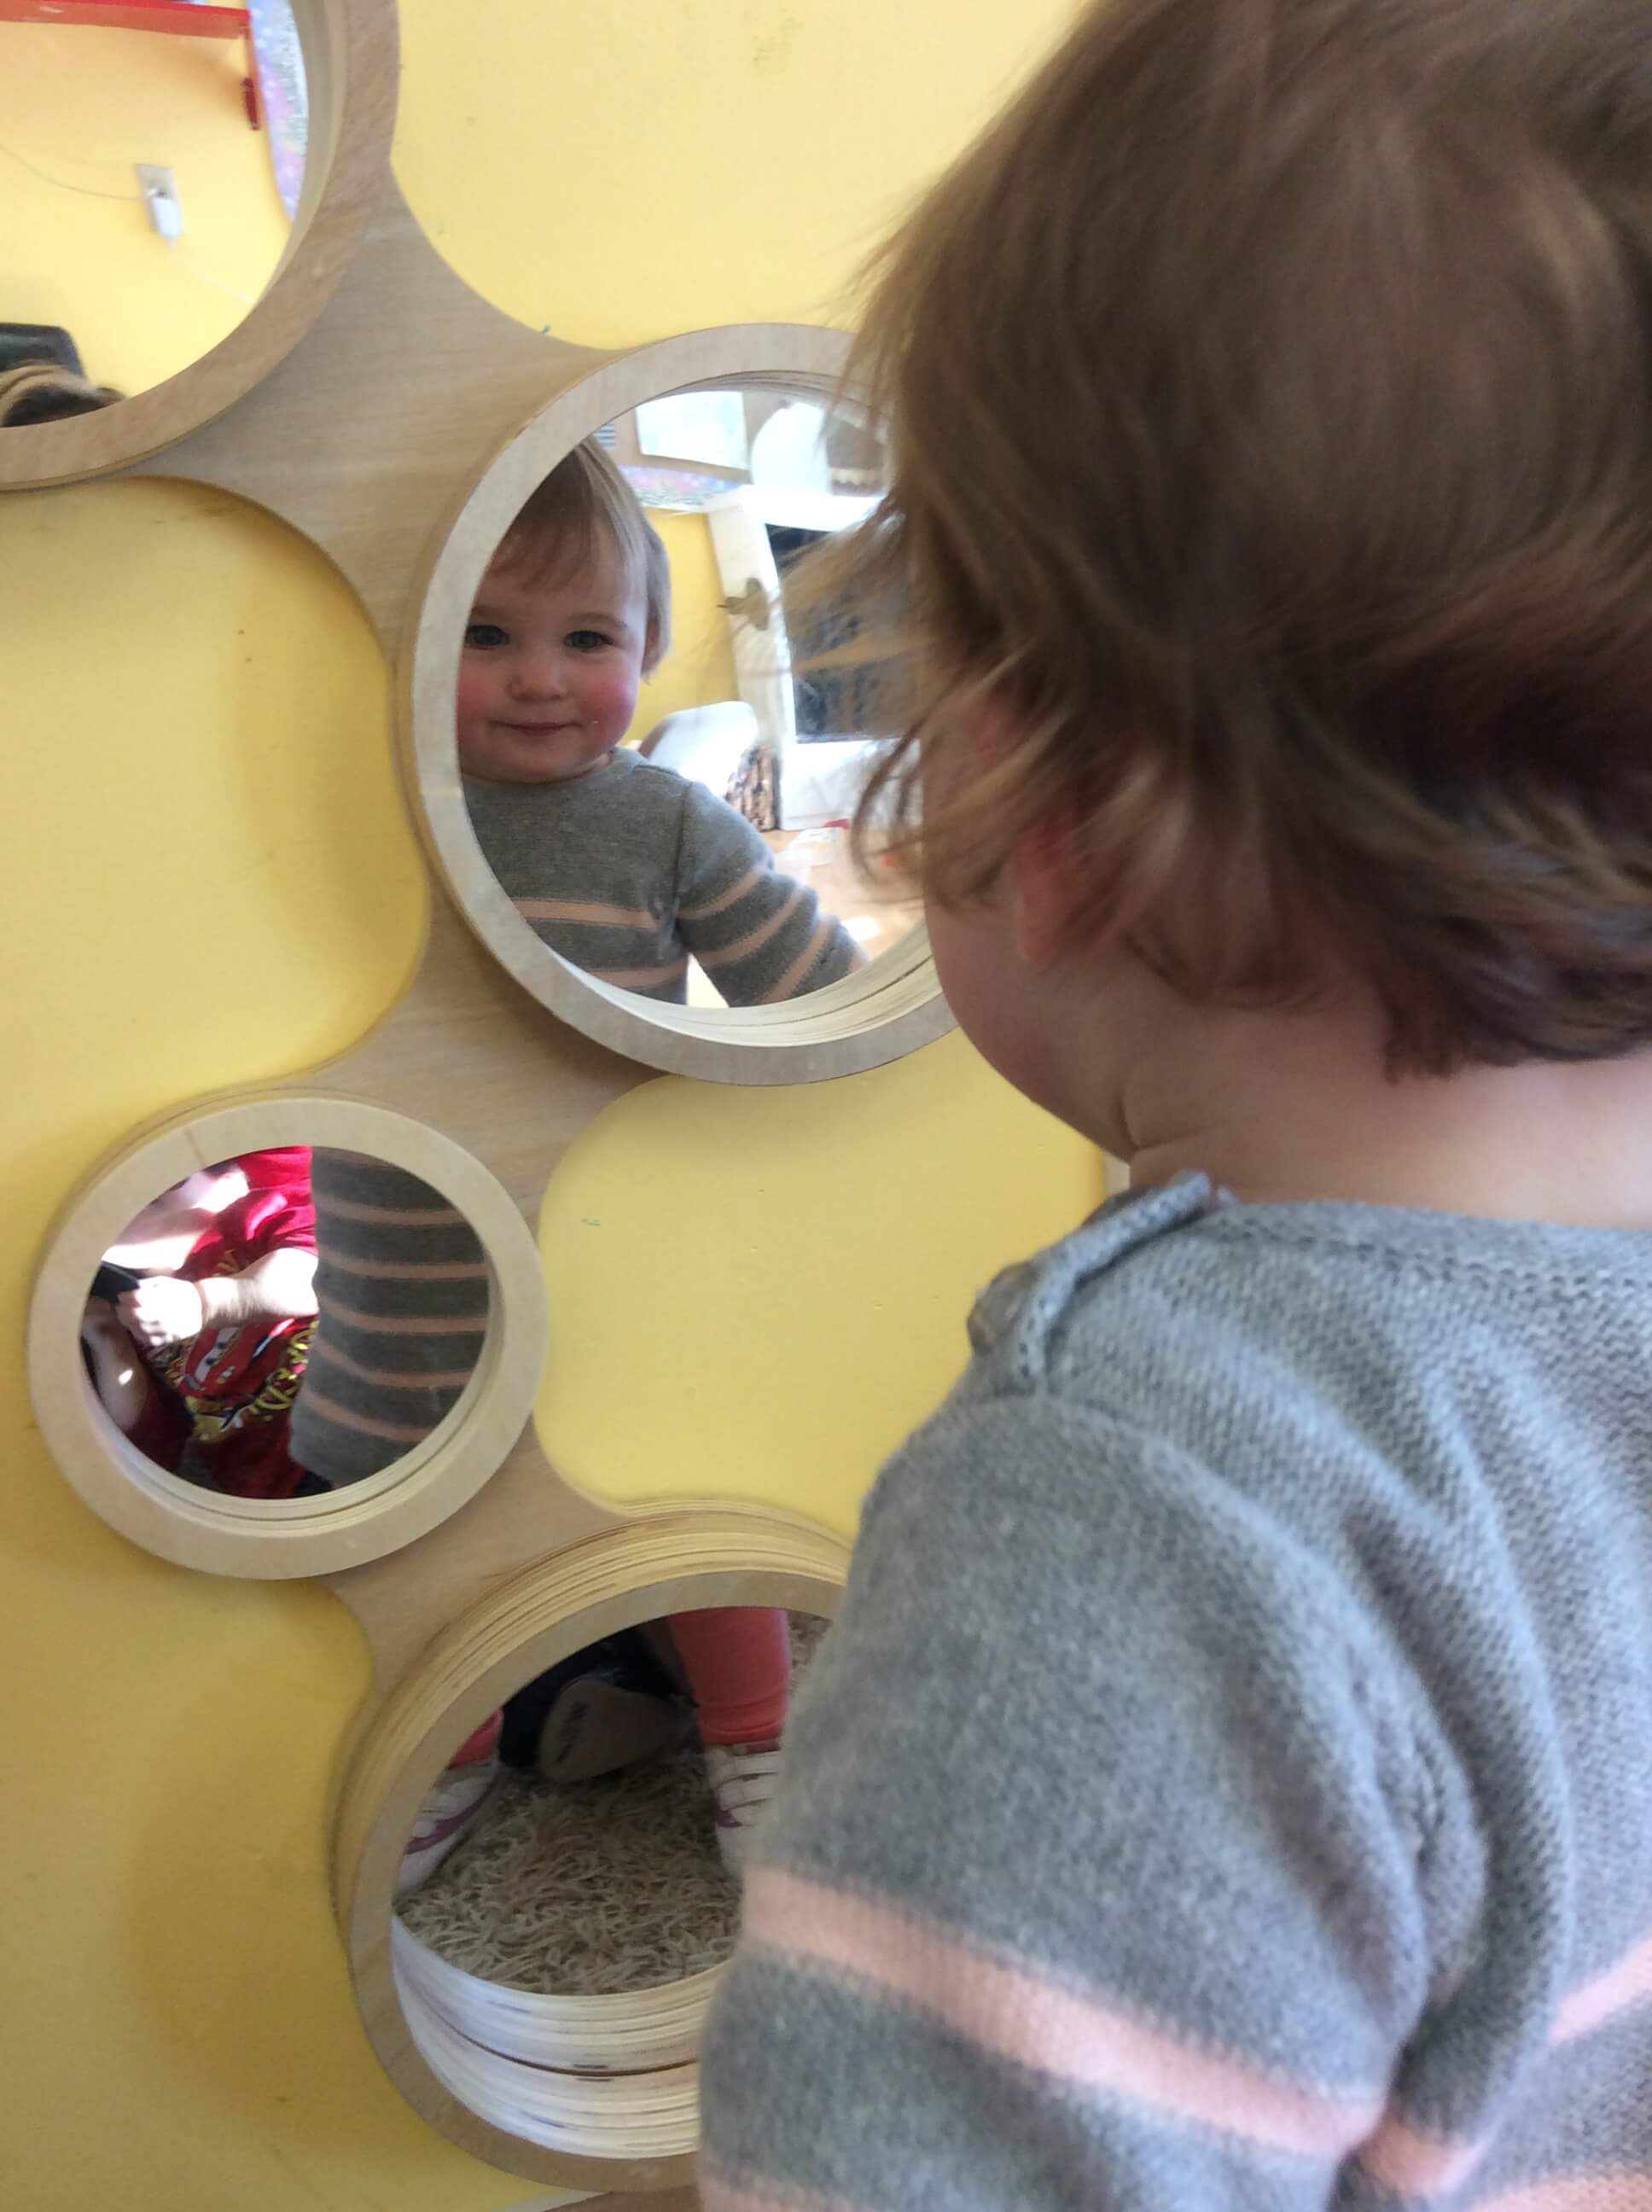 infant looking at her reflection